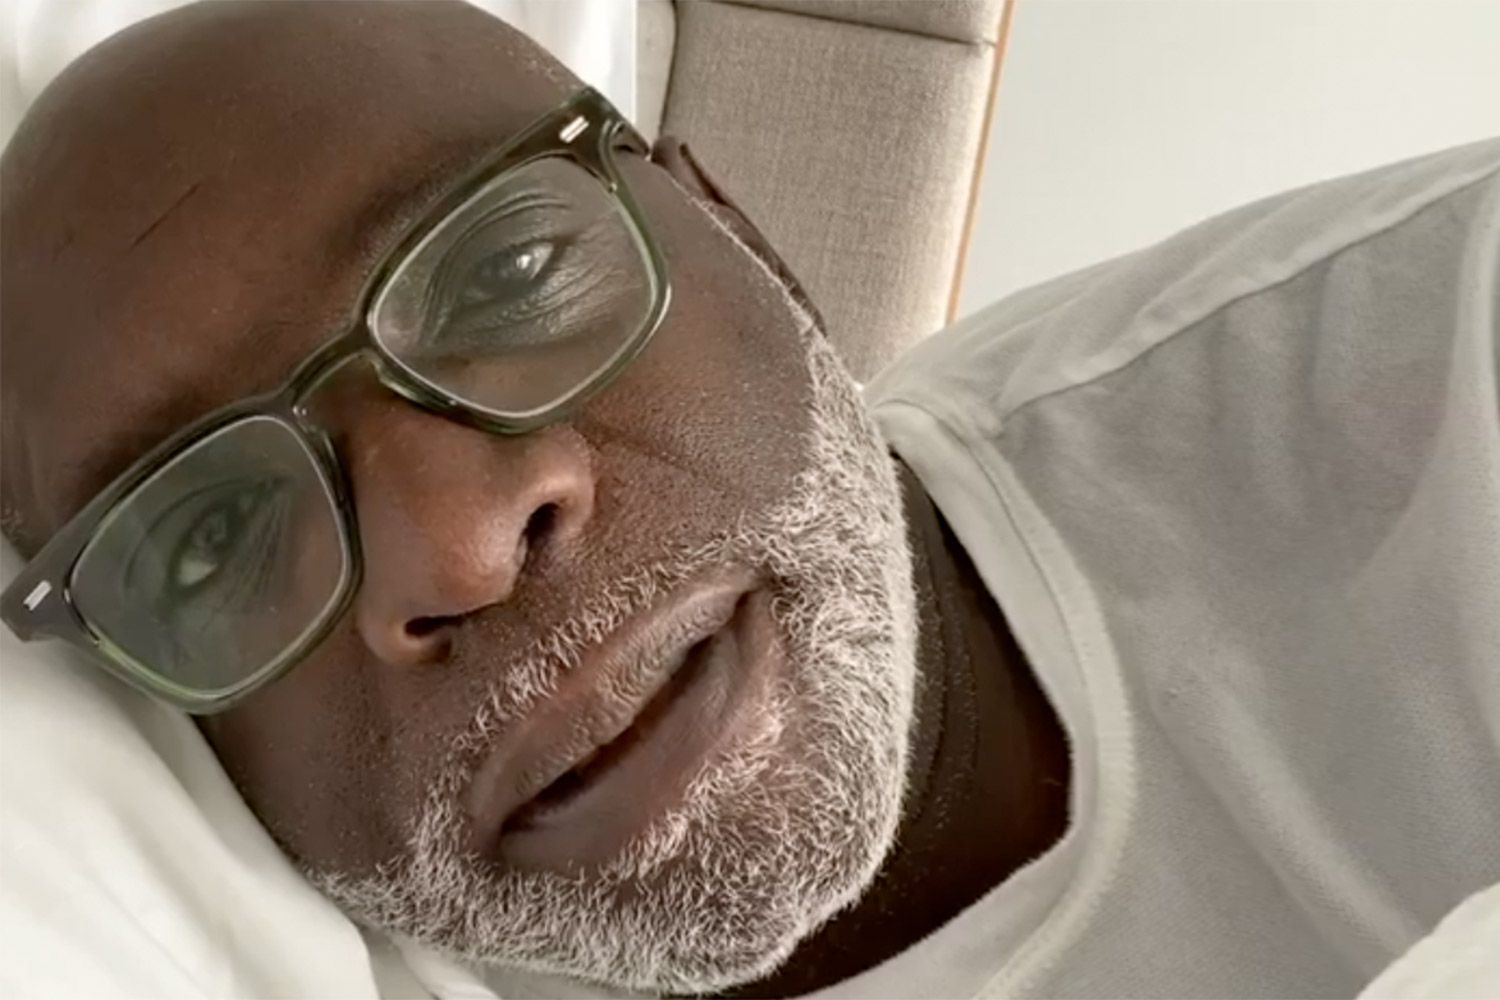 Peter Thomas Arrested For DUI In Atlanta